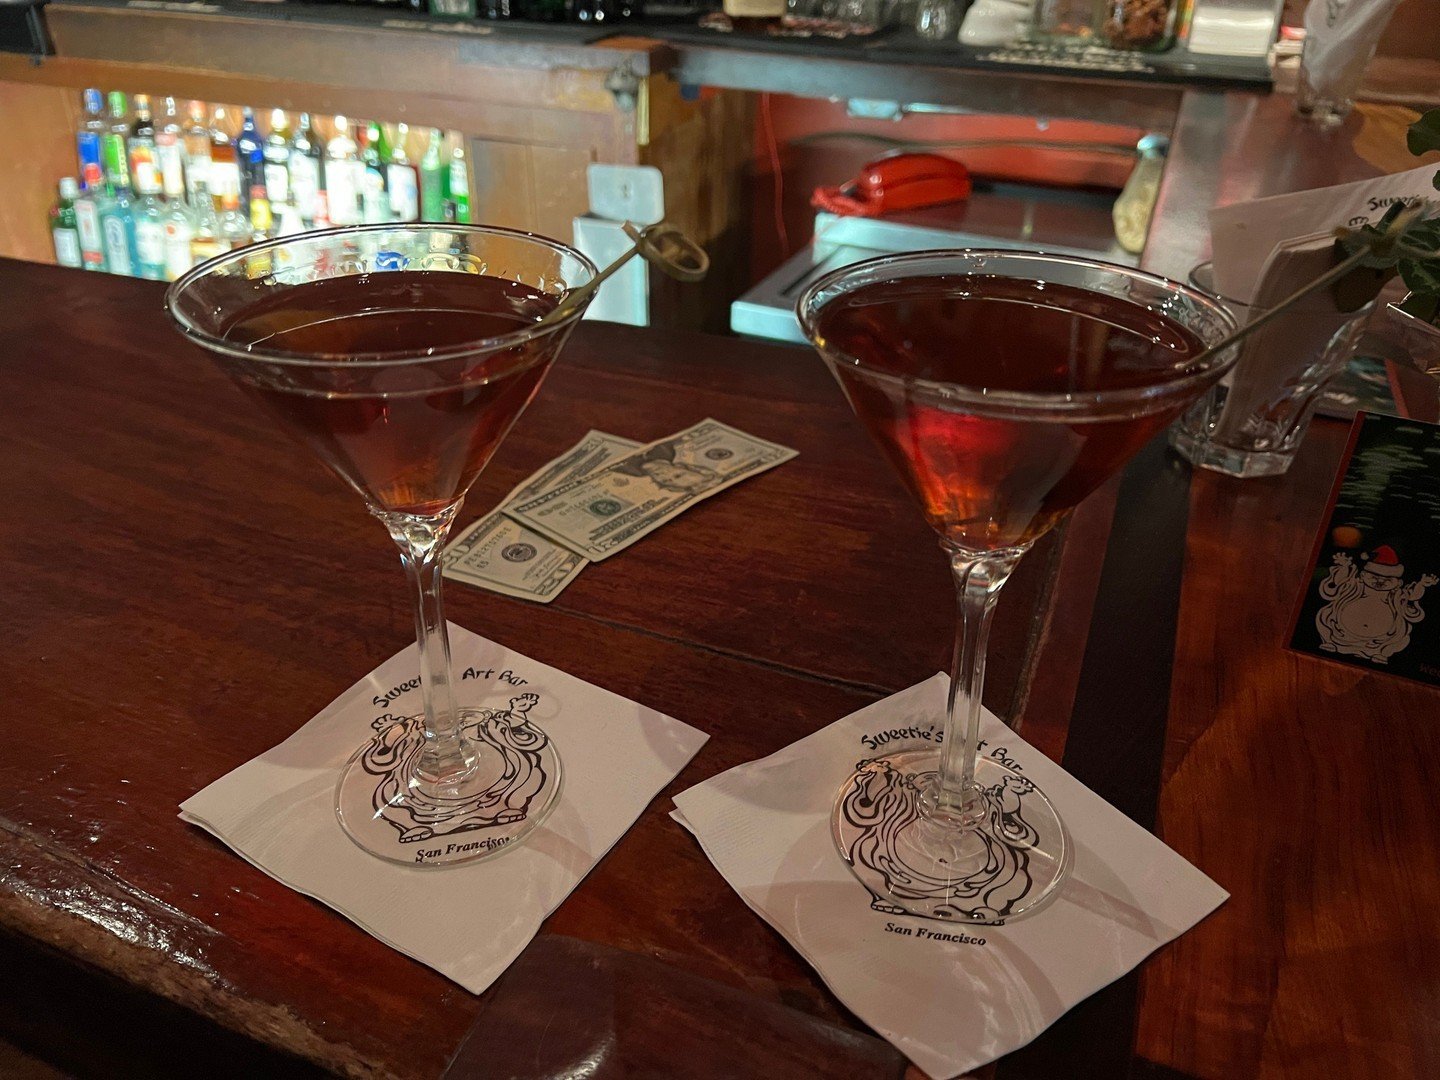 Similar but different. Order the drink of your choice and enjoy a well crafted cocktail at a reasonable price. Yep, we're mostly reasonable at Sweetie's except when we're not. Open Wednesday - Sunday.
#sweetiesartbar
#sweetiescocktails
#friendlypool
